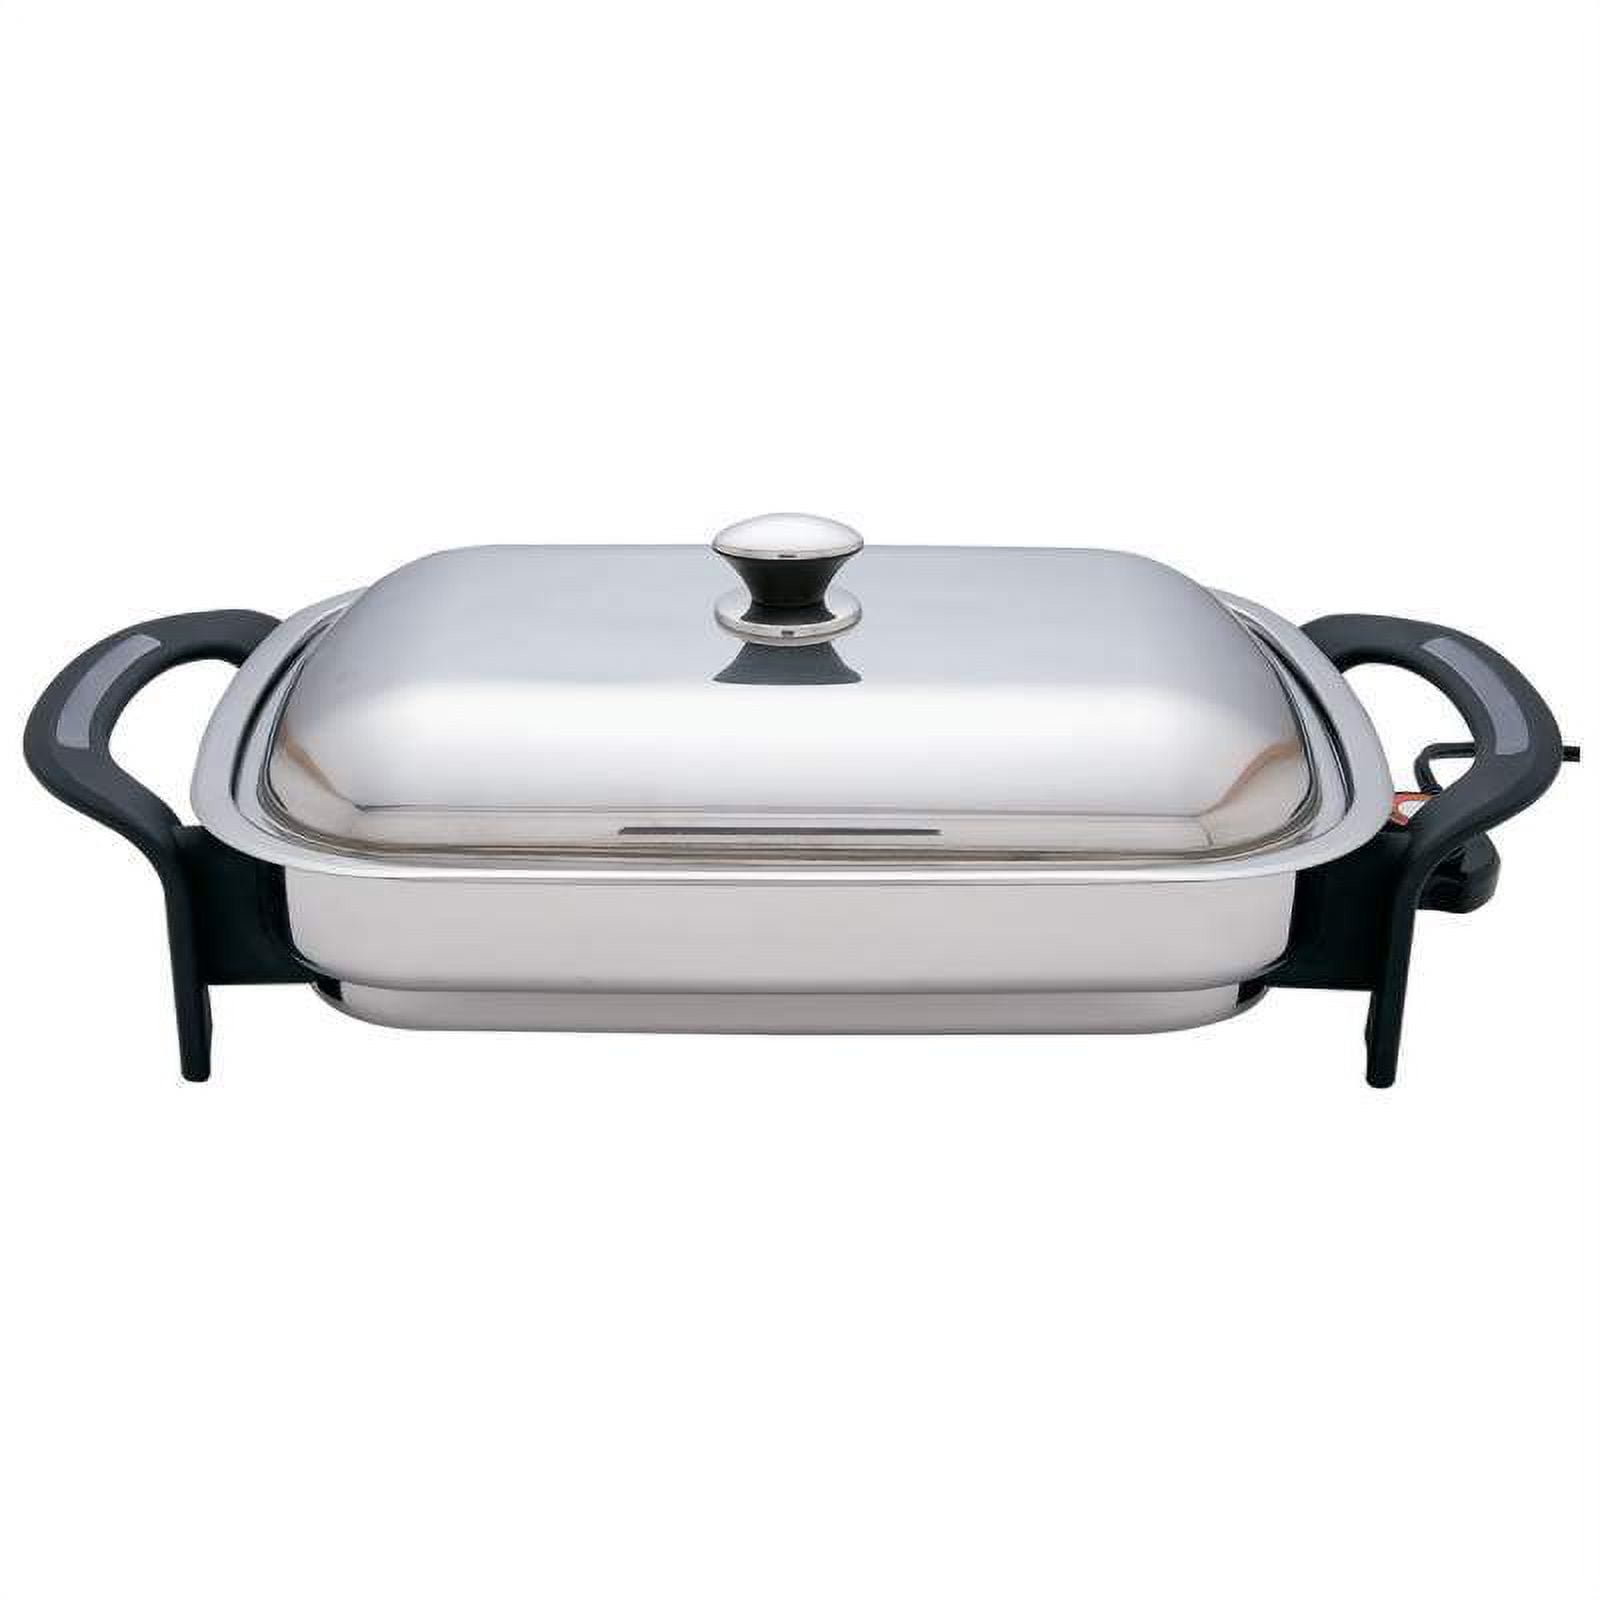 GE 15-Inch Rectangular Stainless Steel Non-Stick Electric Skillet